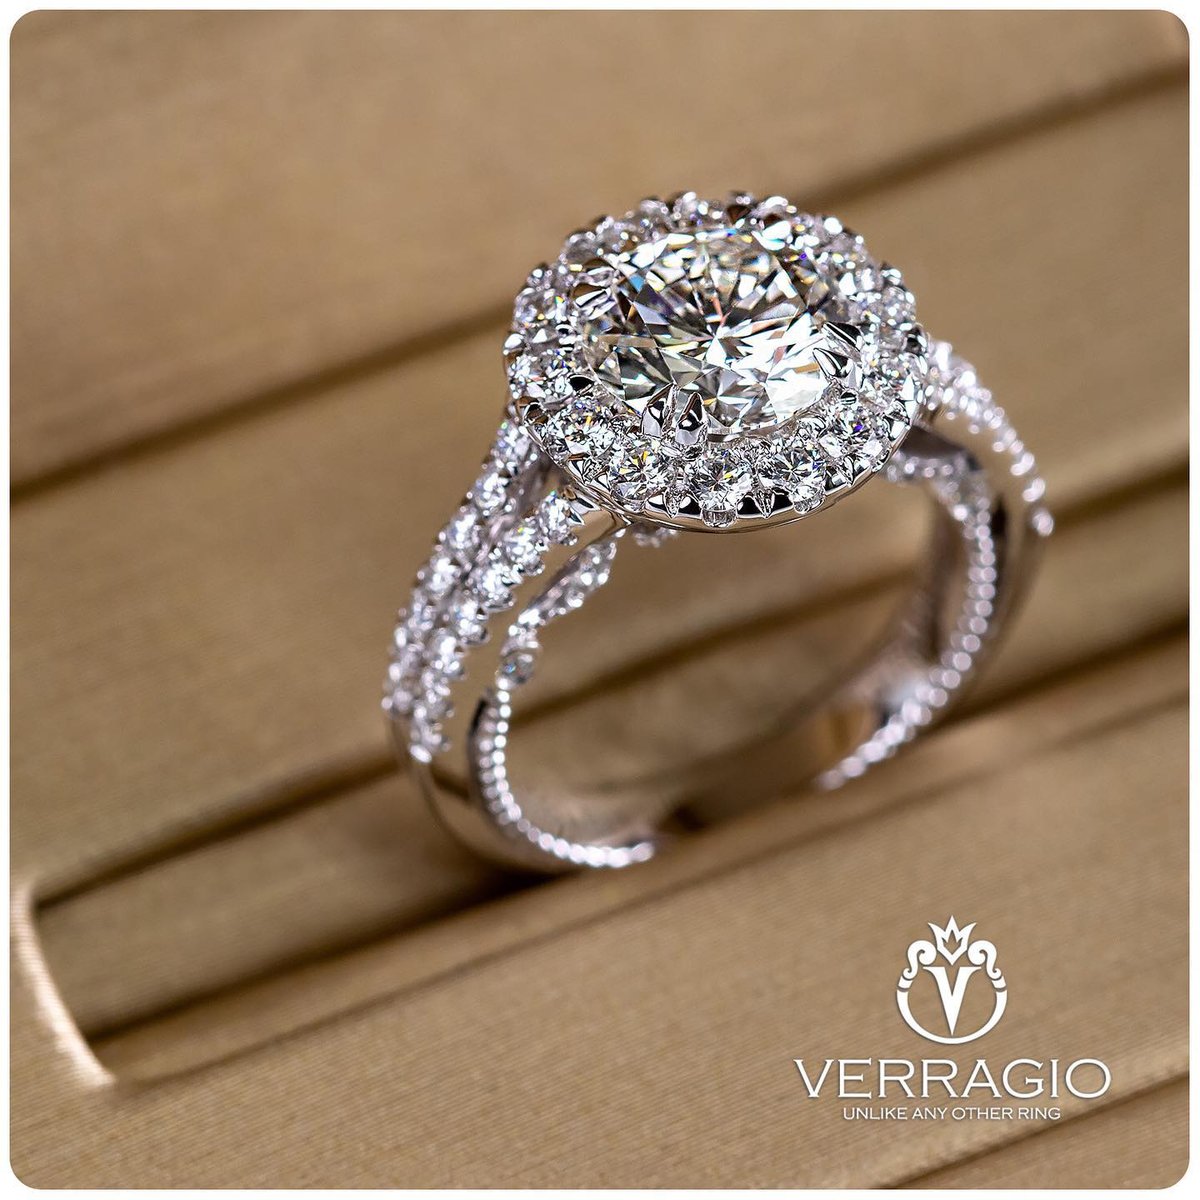 The closer you look, the more you'll fall in love! #Verragio #EngagementRings have the most incredible details, and right now are up to 50% off during our Moving Sale! Find your perfect ring at the perfect price at Rodan.

#shesaidyes #shopyvr #localjeweller #burnaby  #yvrevents